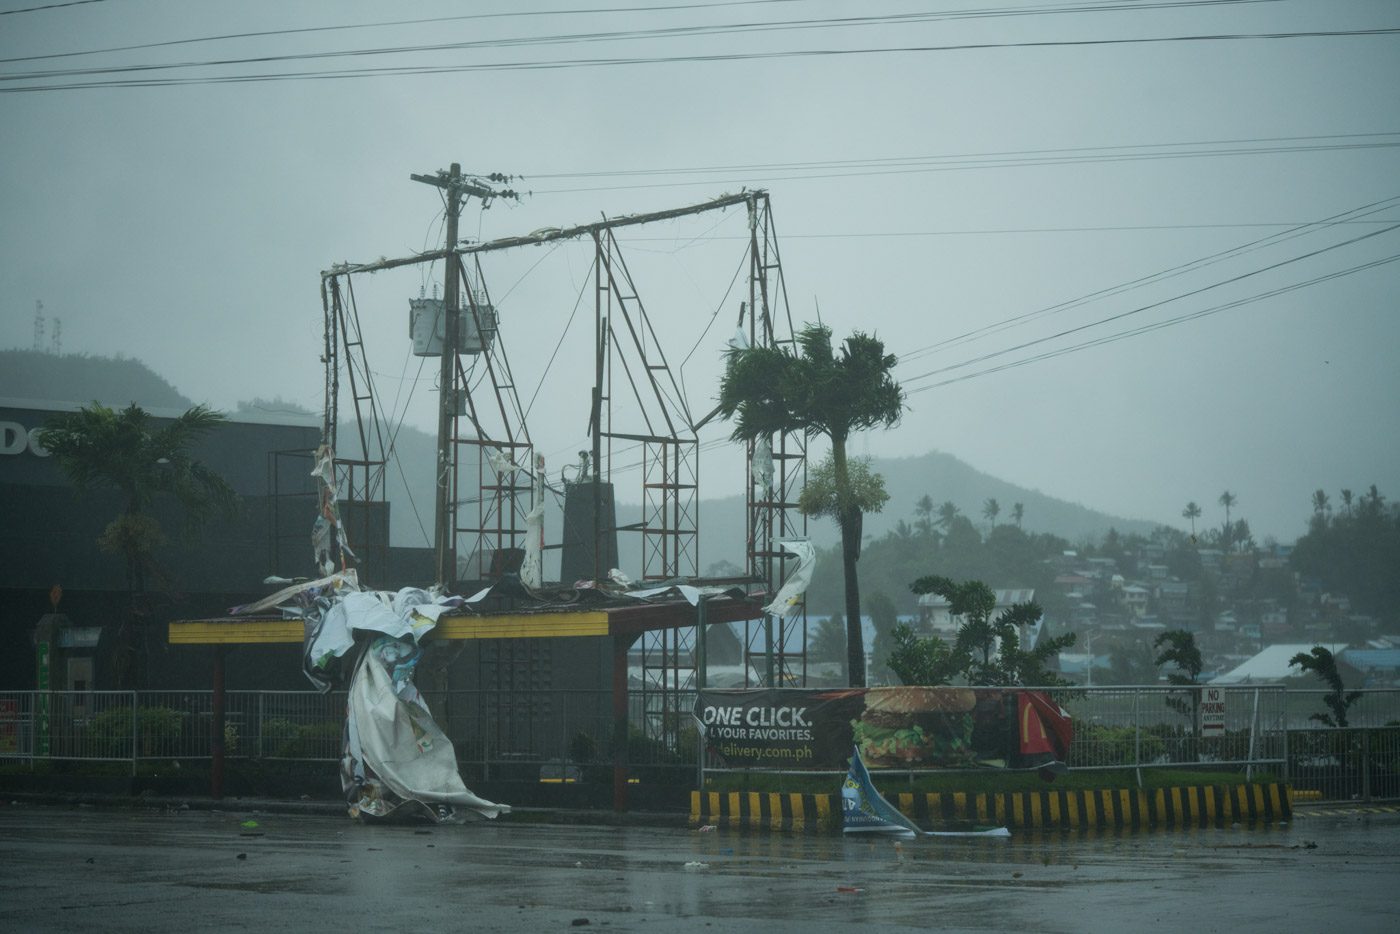 DESTROYED. Billboards are destroyed by strong winds ahead of Urduja's expected landfall in Eastern Samar or Northern Samar